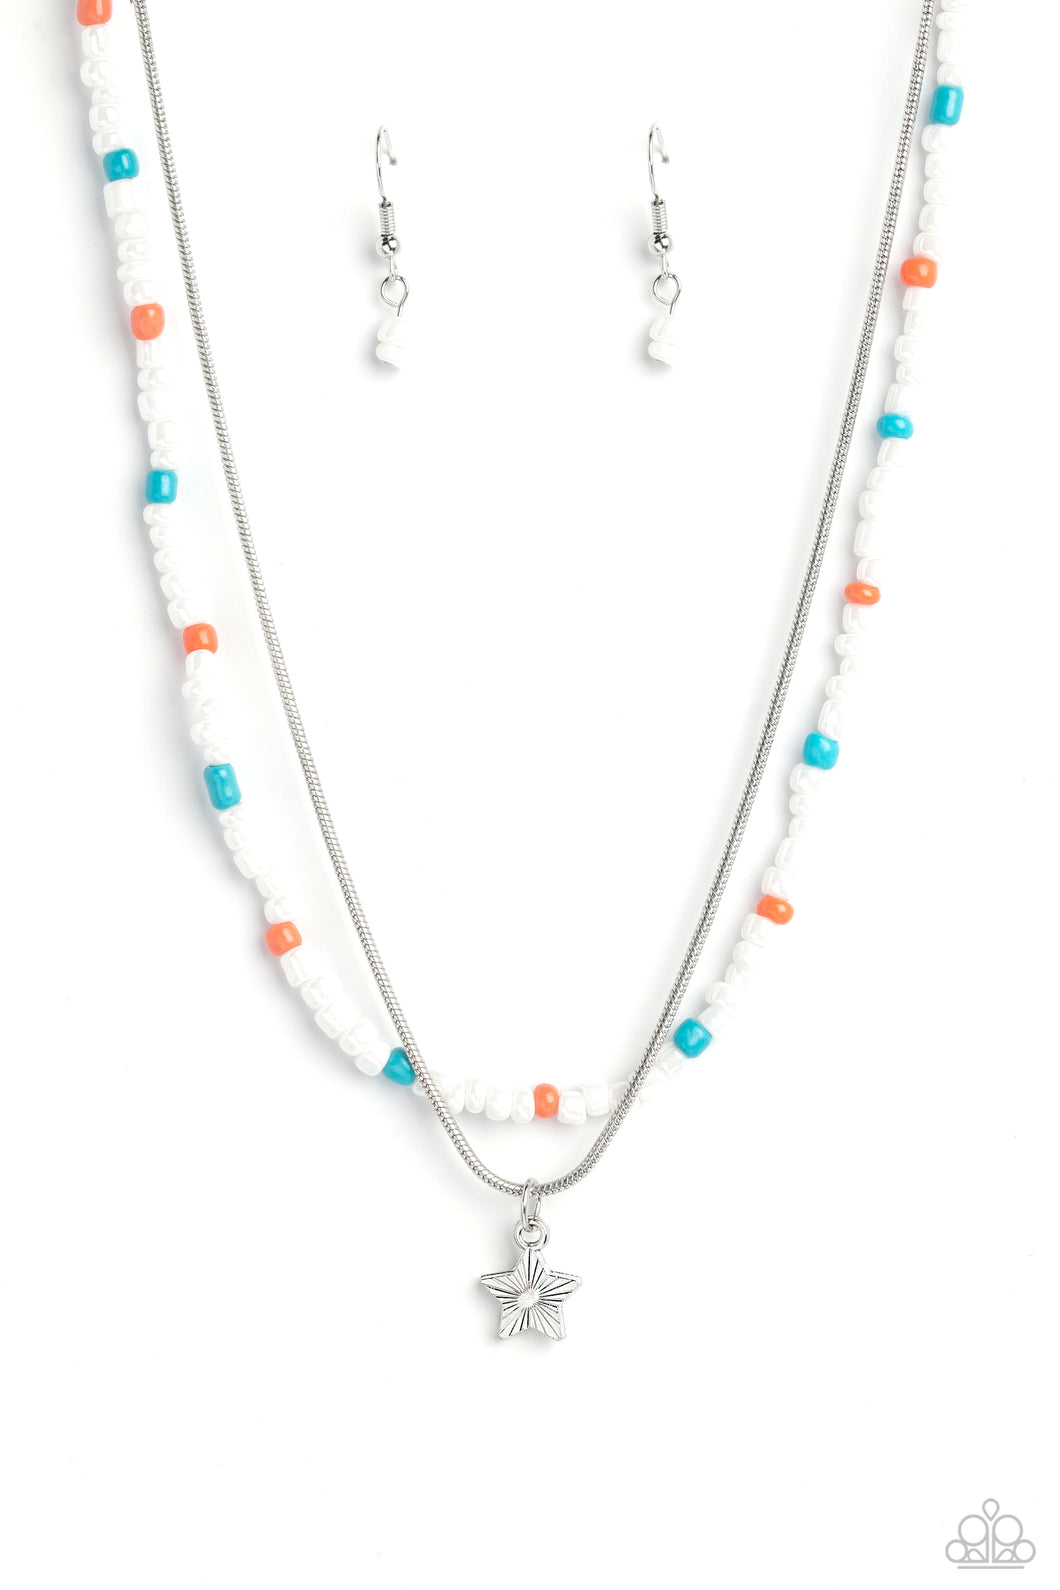 Starry Serendipity - White( Multicolored Seed Bead Star) Necklace